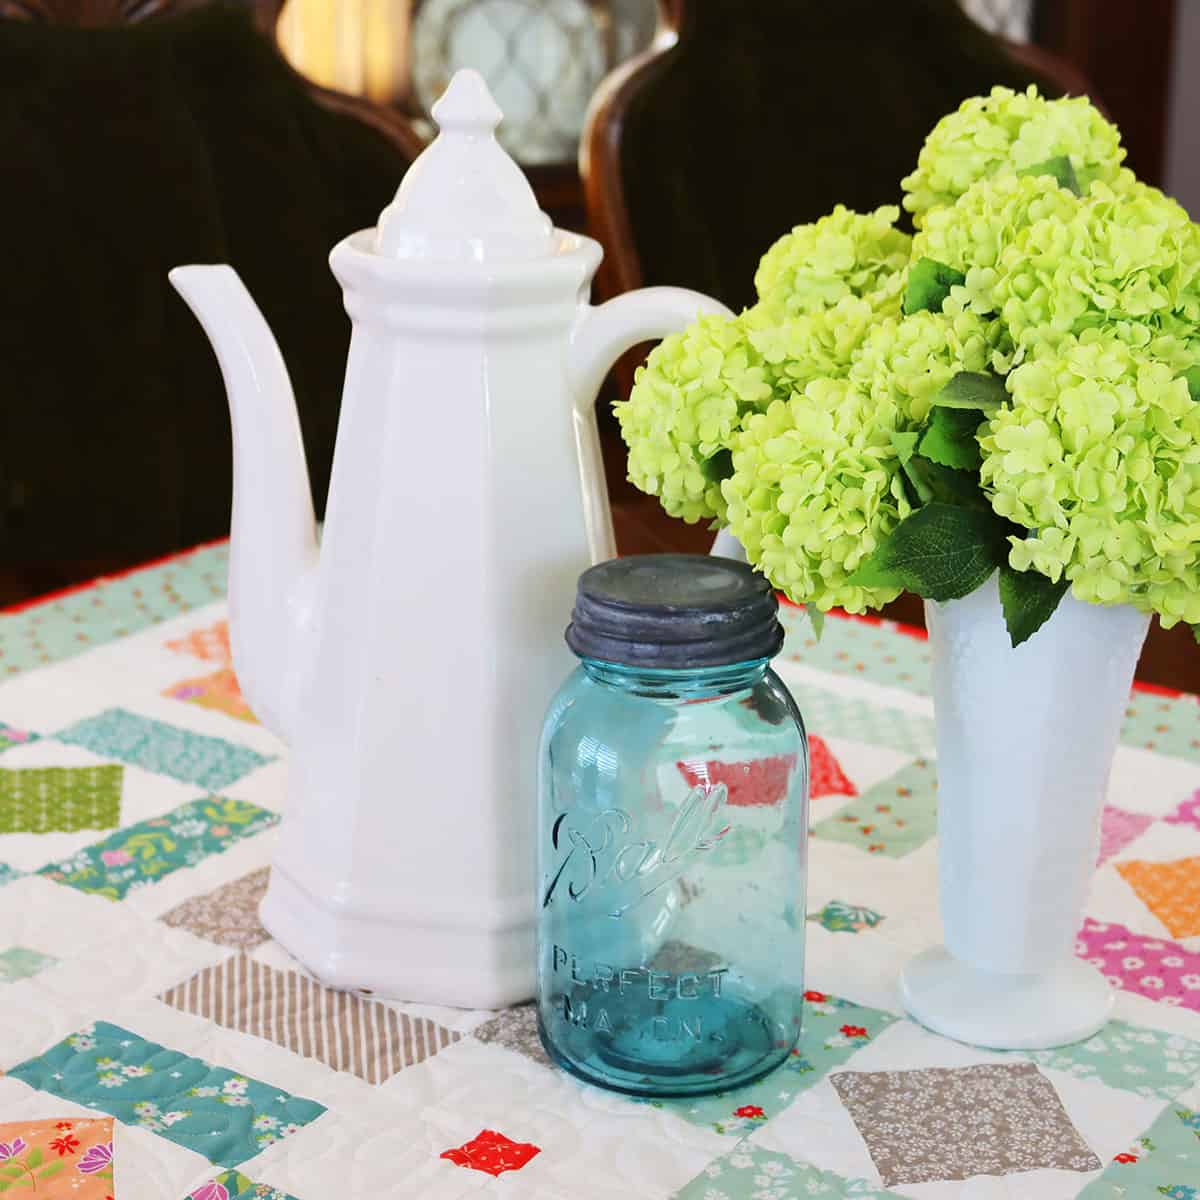 Quilted table topper with vase, blue canning jar, and pitcher